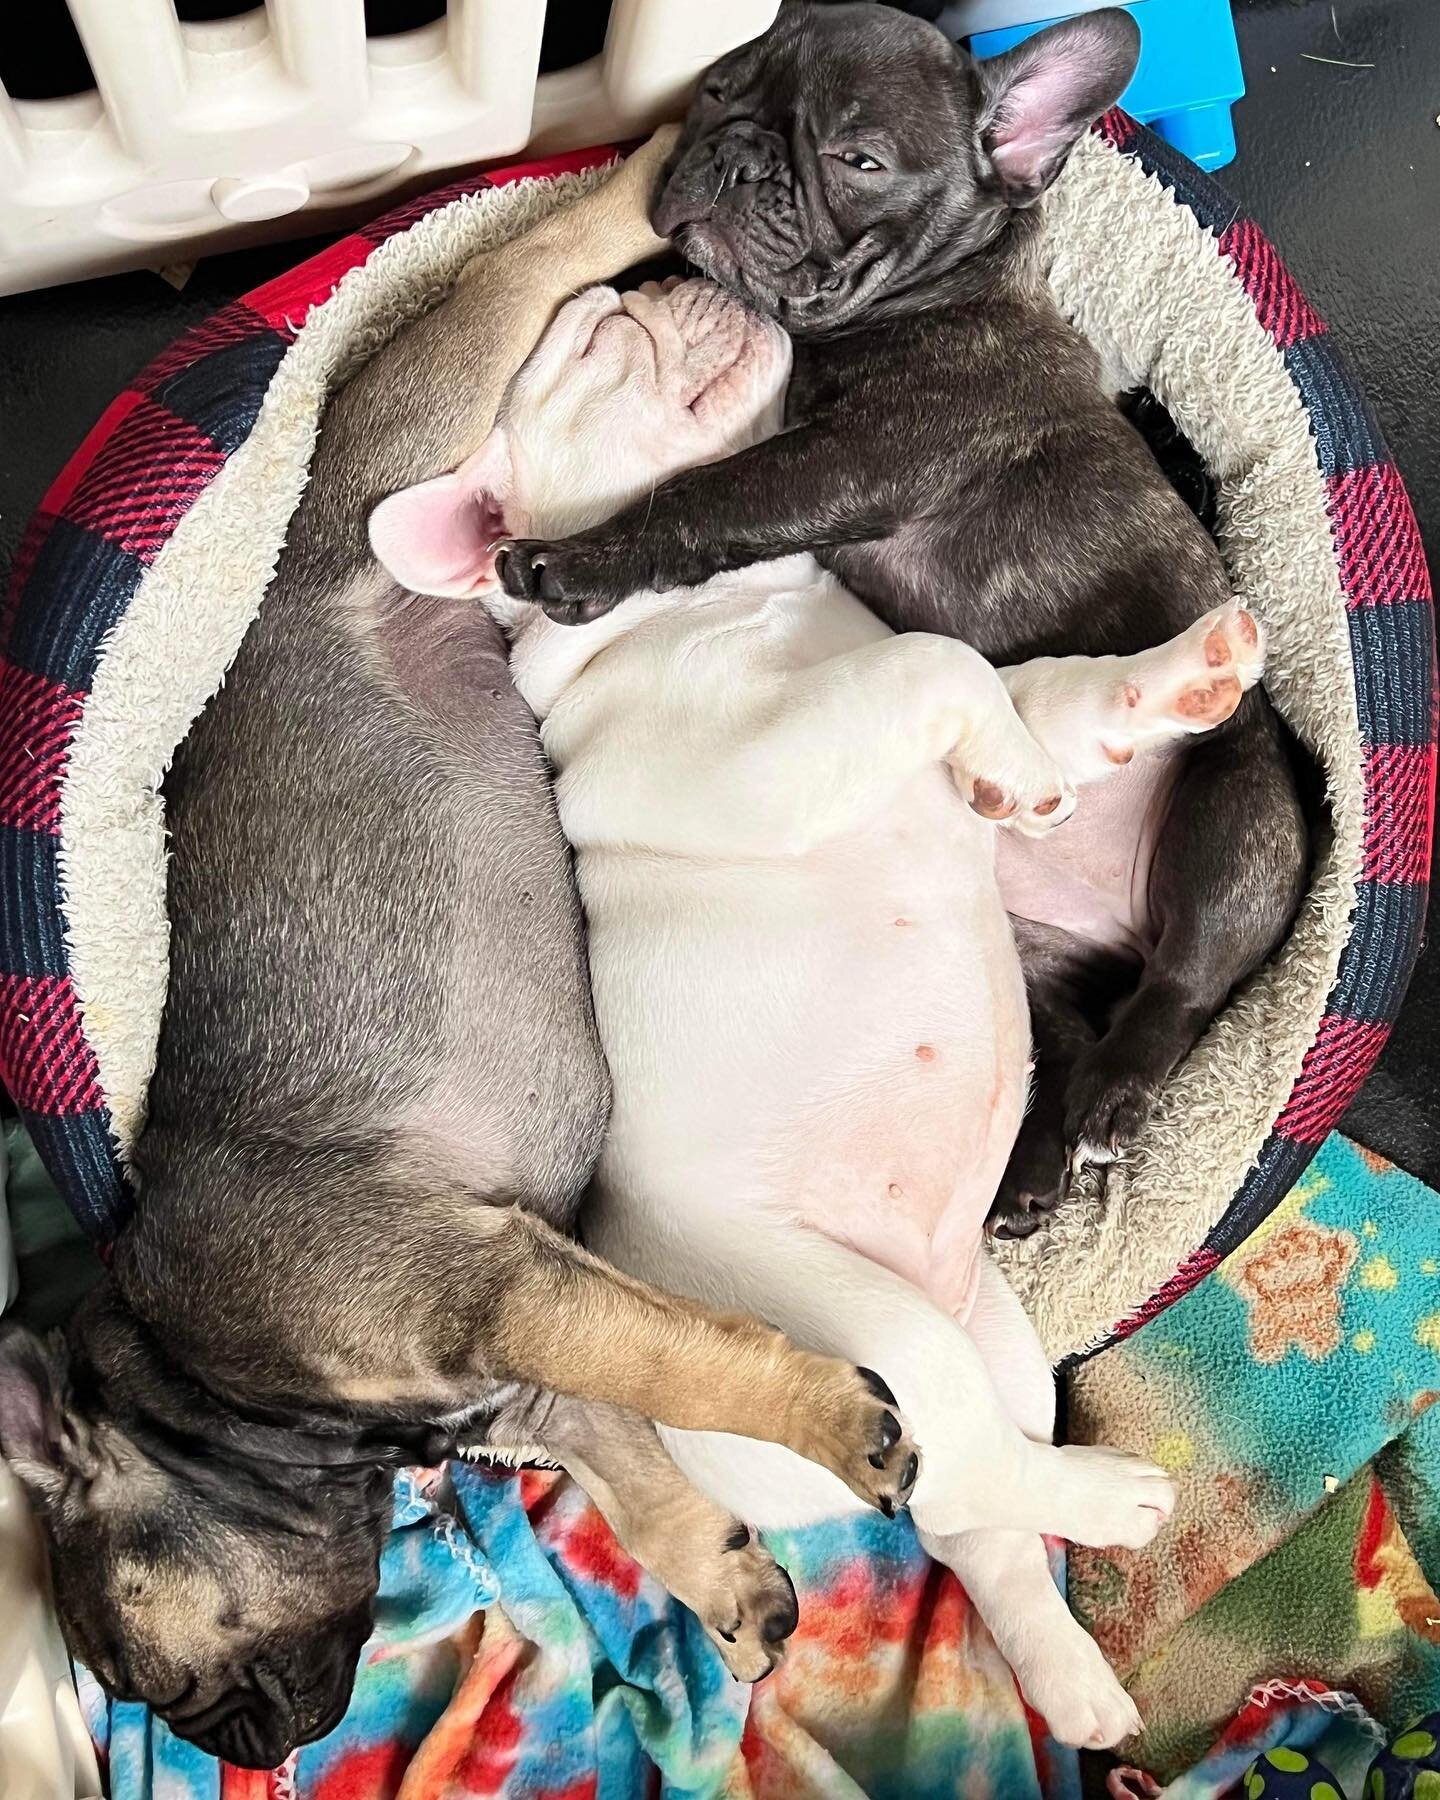 Lola and Stan are looking for parents. Brindle baby goes home tomorrow ❤️

#frenchbulldog #frenchie #bulldog #seattlebulldogs #washingtonbulldogs #seattlepuppies #squishyfacecrew #waiting #englishbulldogpuppy #englishbulldogpuppies  #frenchbulldogpup